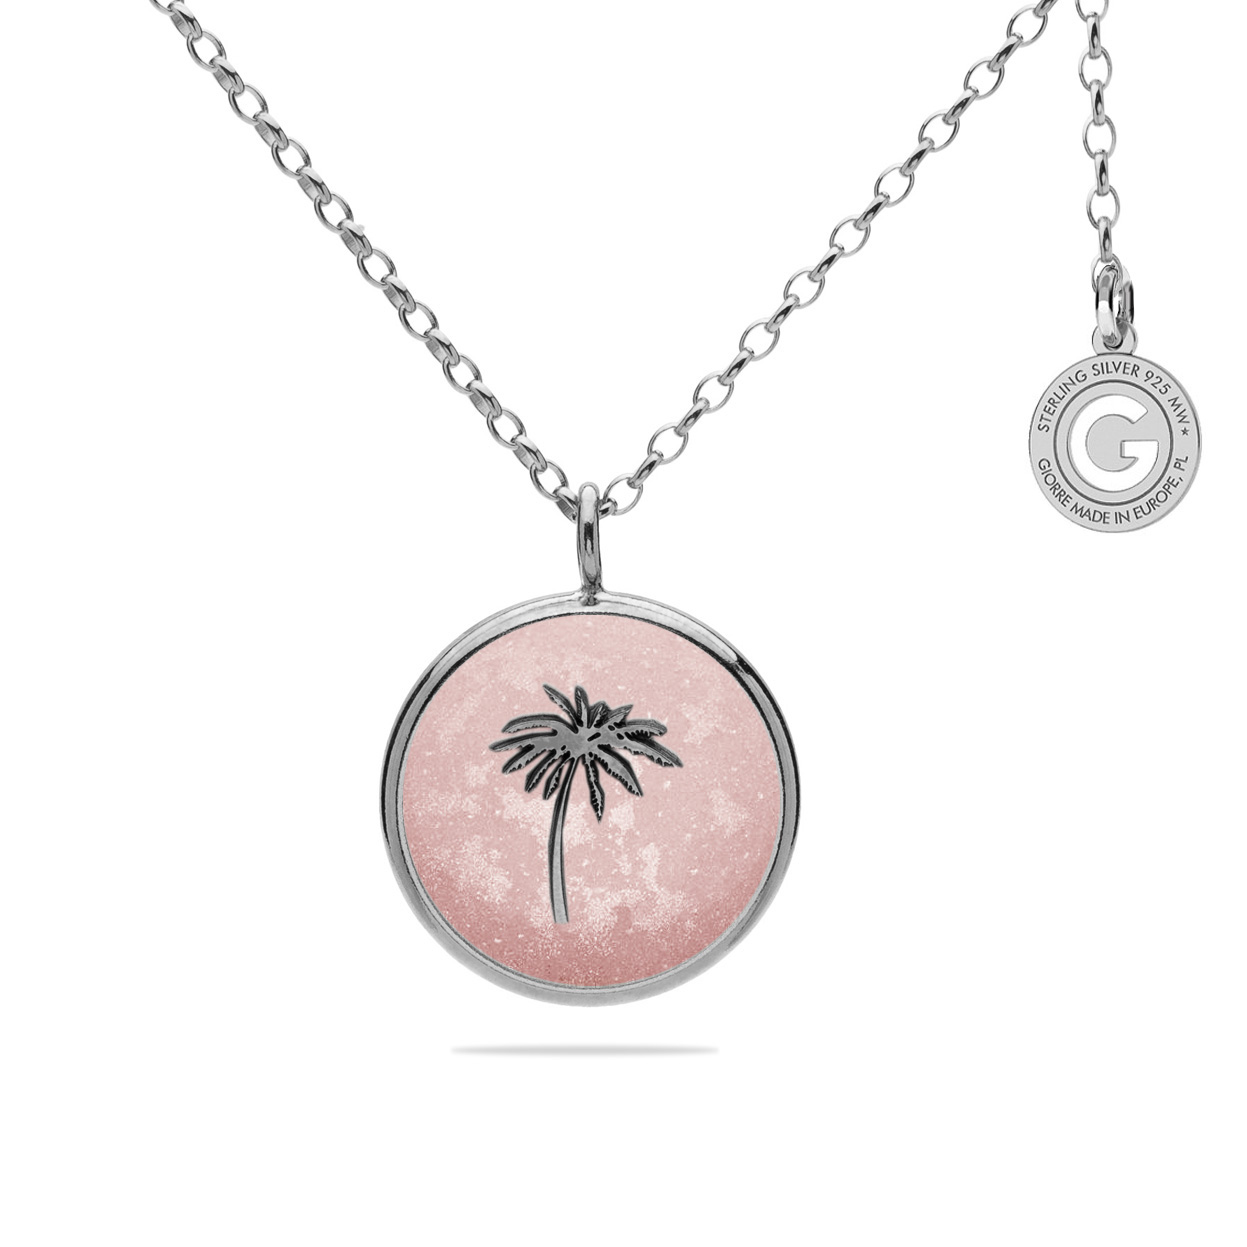 PALM TREE MEDALLION NECKLACE SILVER 925